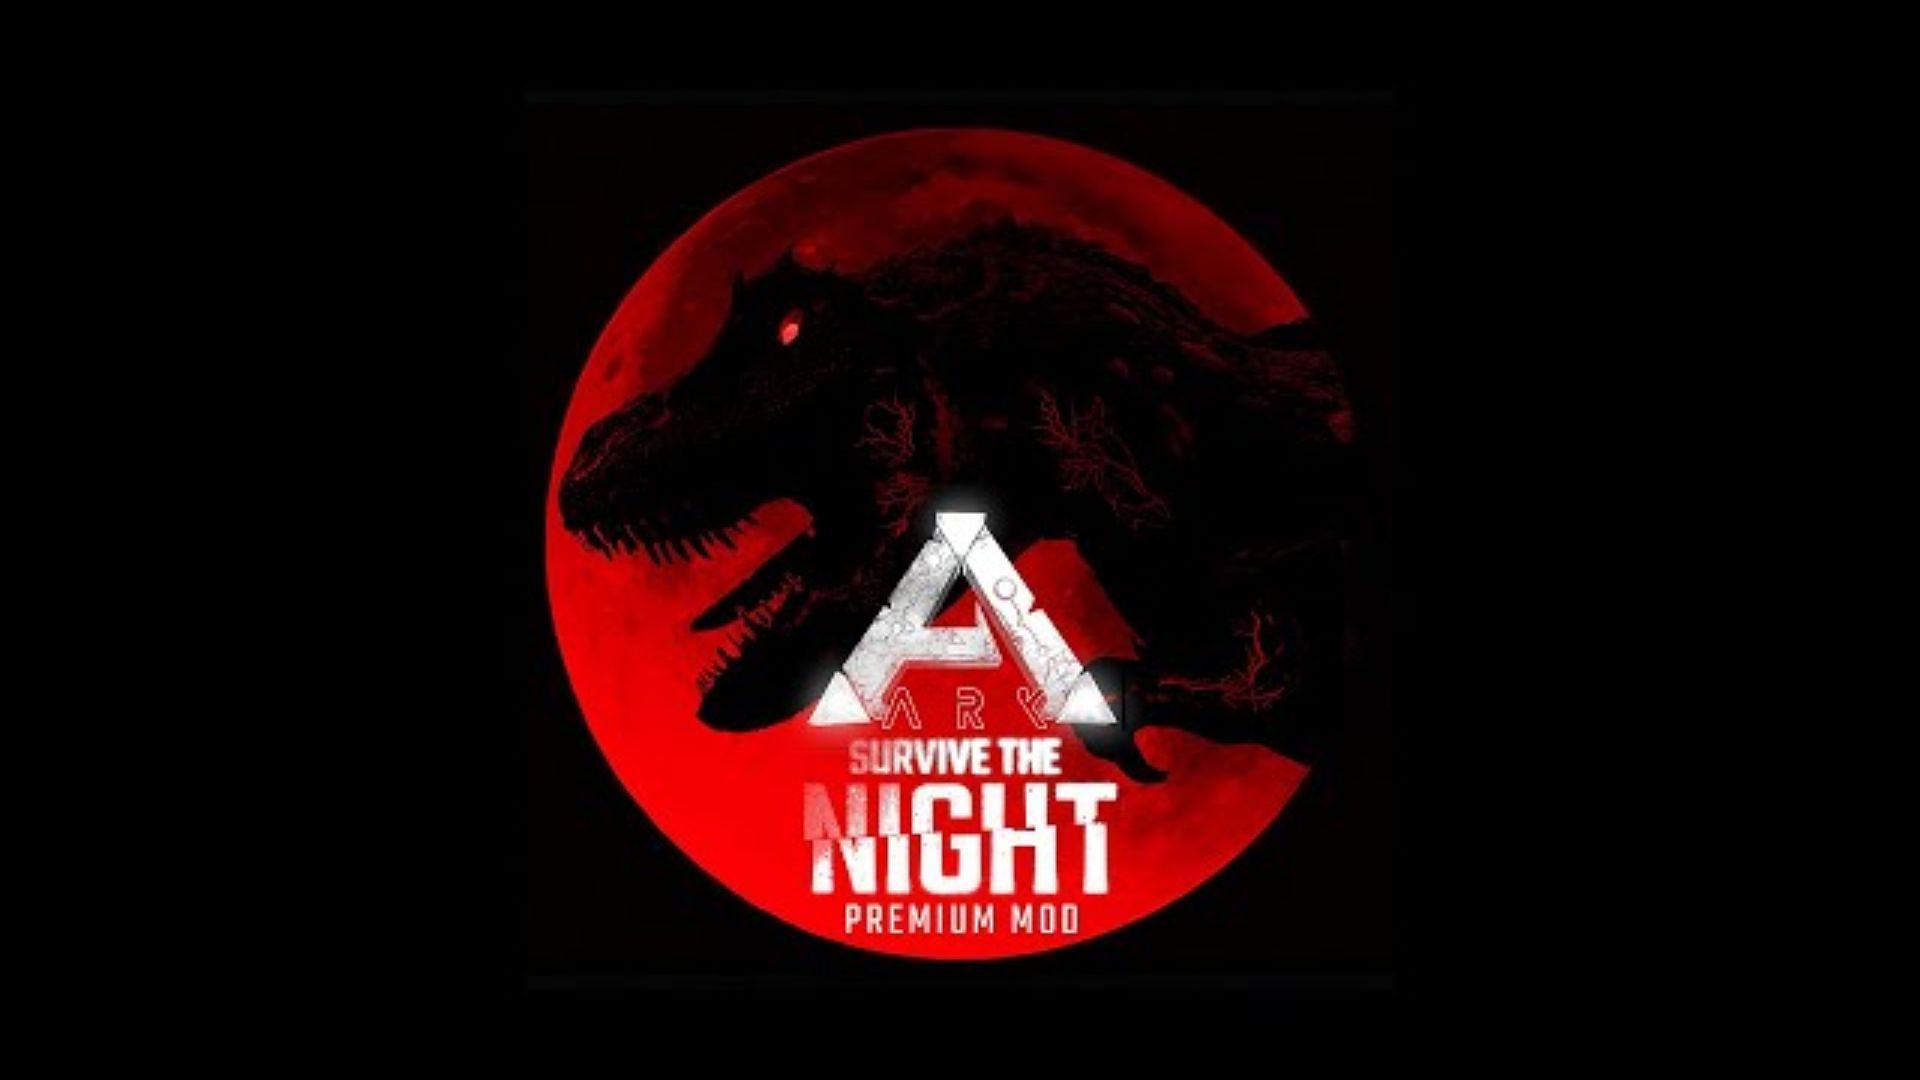 ARK Survive the Night mod can be bought for $10. (Image via Studio Wildcard)